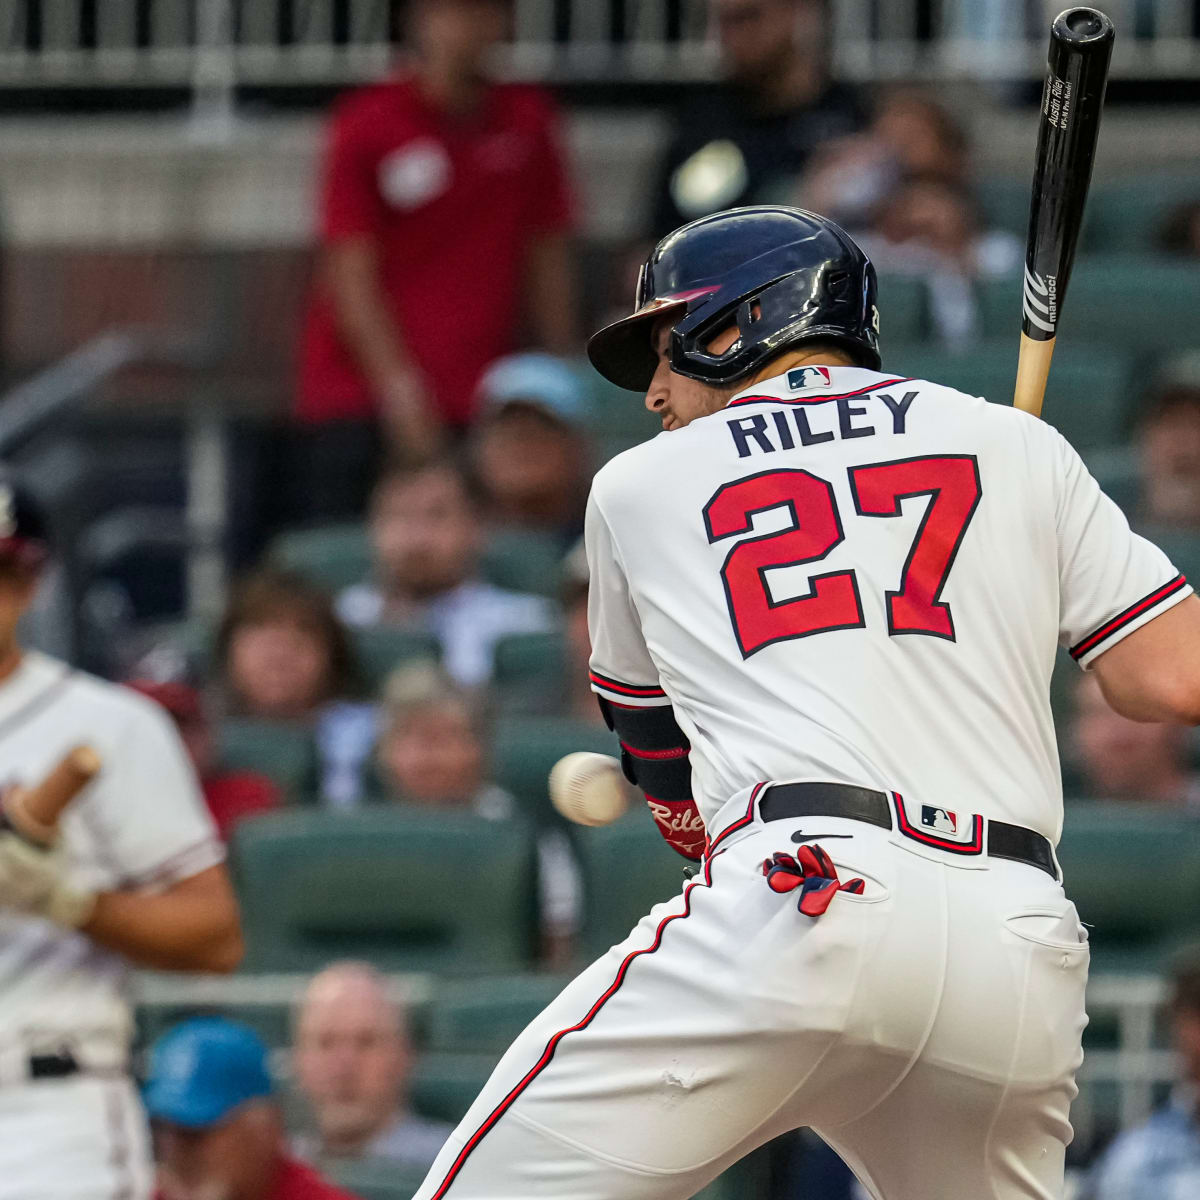 VIDEO: Side Angle of Austin Riley Home Run in Braves Spring